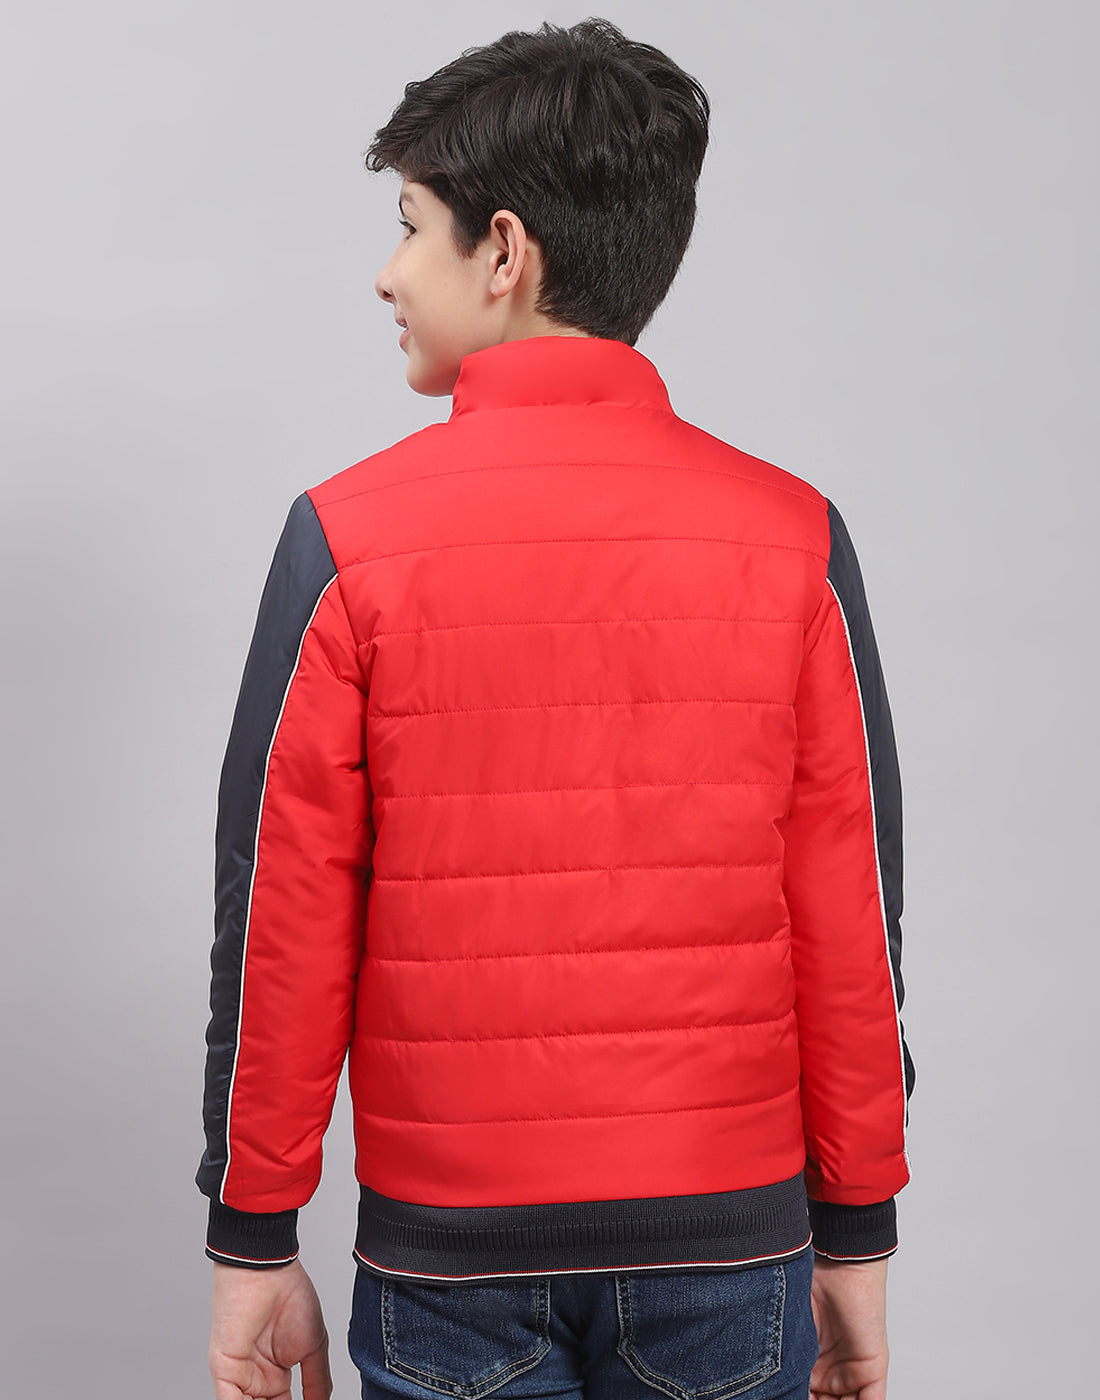 Boys Red Printed Stand Collar Full Sleeve Boys Jacket